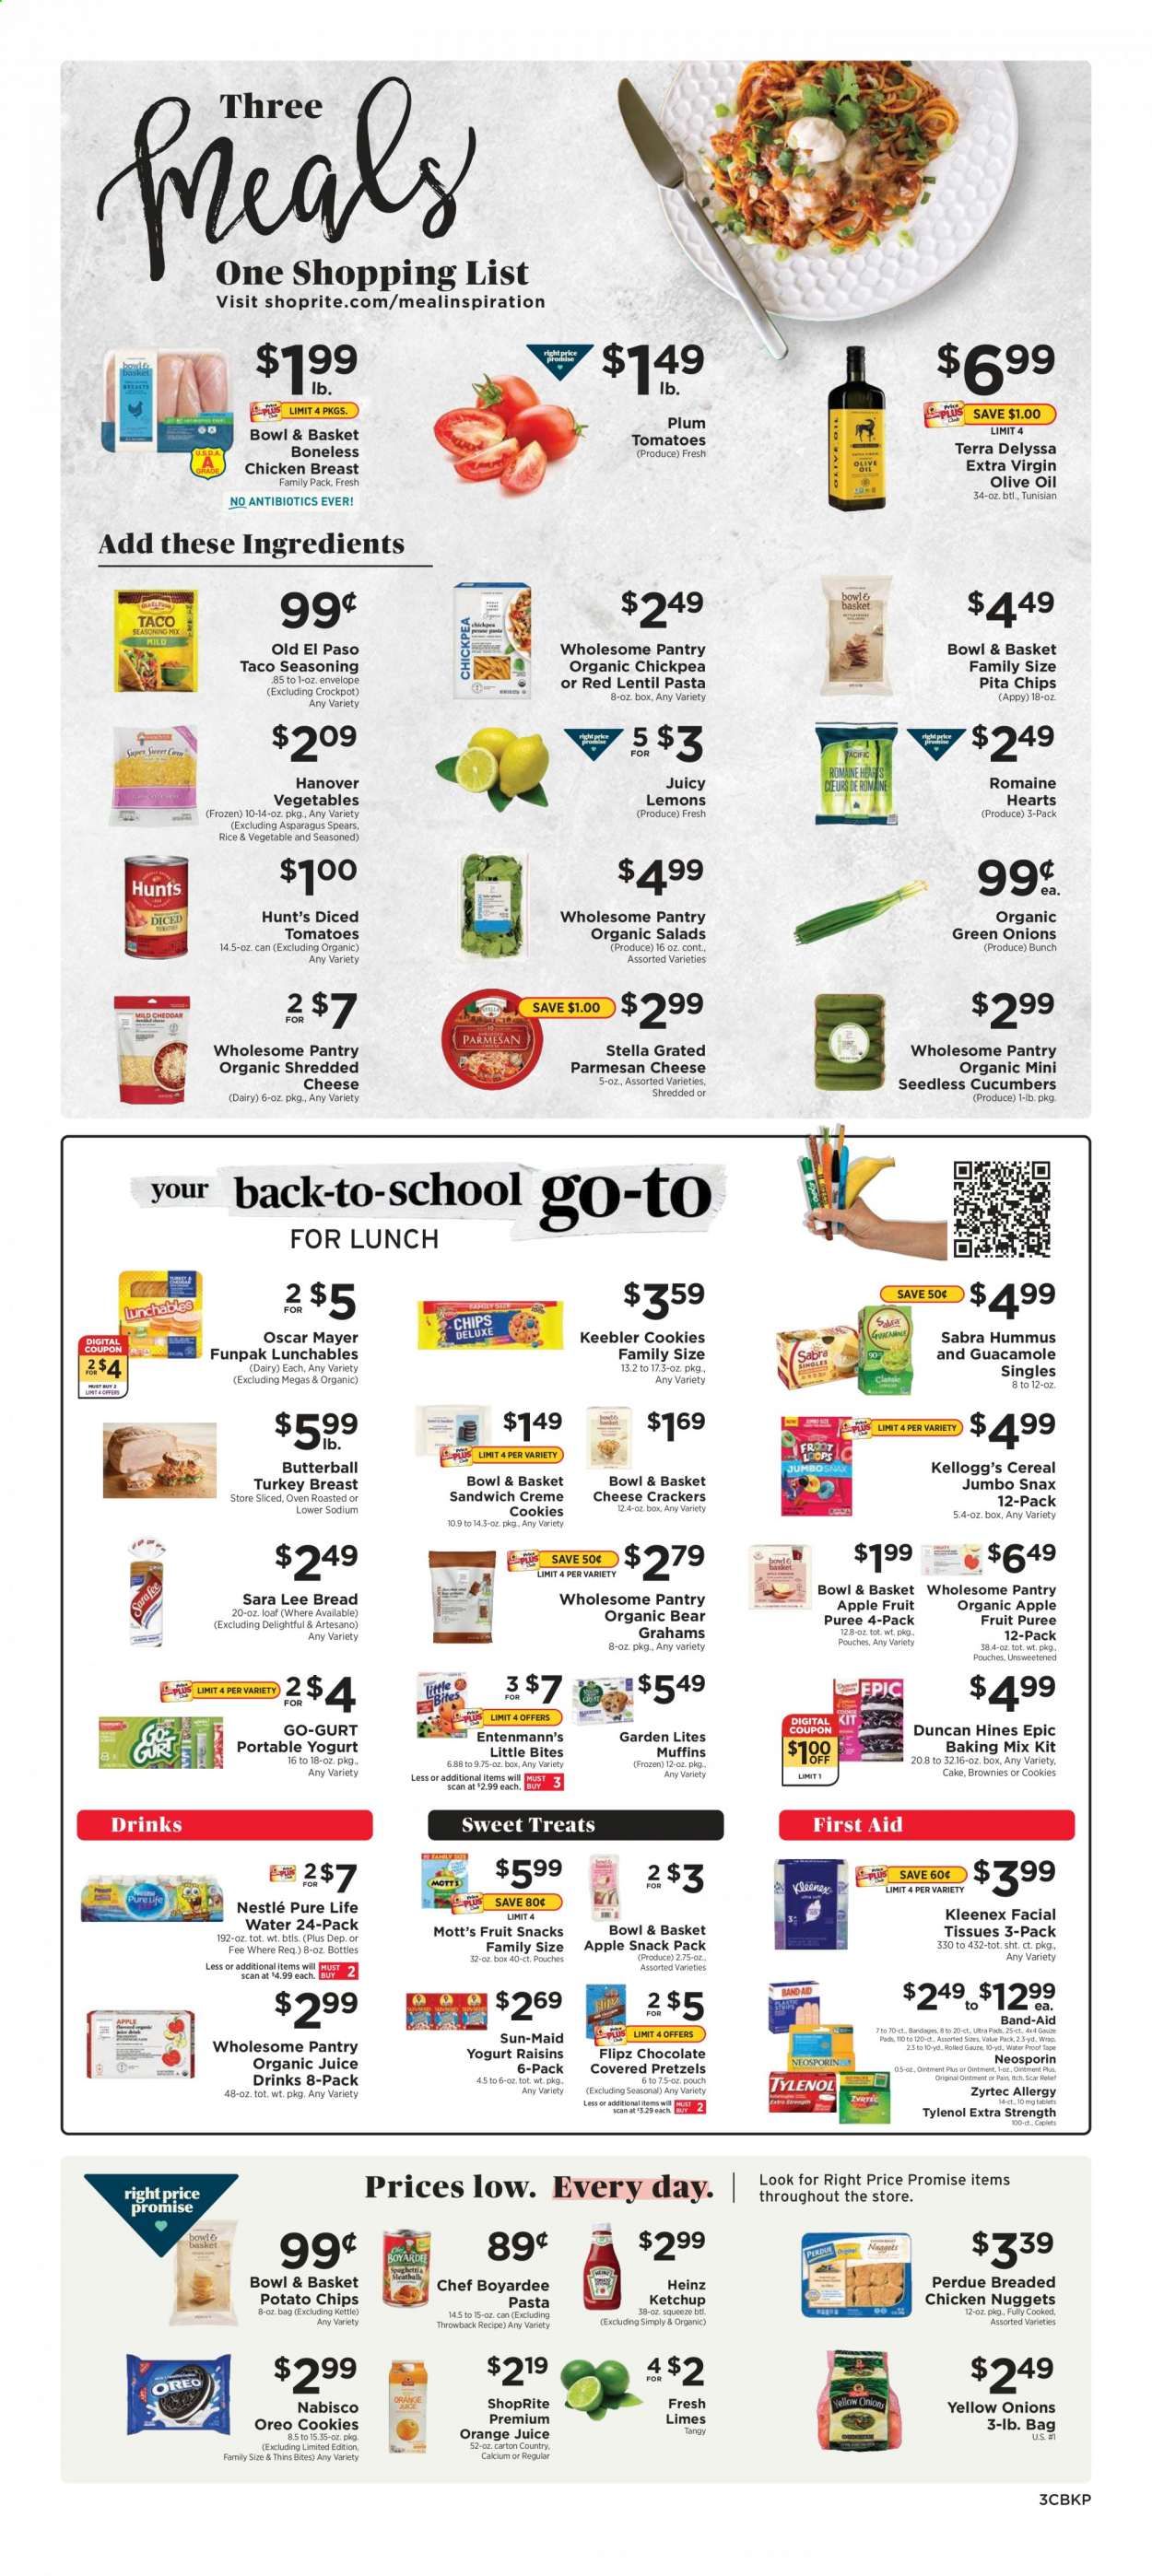 thumbnail - ShopRite Flyer - 08/22/2021 - 08/28/2021 - Sales products - pretzels, cake, Old El Paso, Sara Lee, Bowl & Basket, brownies, Entenmann's, tomatoes, limes, Mott's, sandwich, nuggets, fried chicken, chicken nuggets, Perdue®, Lunchables, Butterball, Oscar Mayer, hummus, guacamole, shredded cheese, parmesan, Oreo, yoghurt, cookies, Nestlé, crackers, Kellogg's, fruit snack, Little Bites, Keebler, potato chips, Thins, pita chips, Heinz, Chef Boyardee, cereals, rice, spice, ketchup, extra virgin olive oil, olive oil, oil, raisins, dried fruit, orange juice, juice, Pure Life Water, turkey breast, ointment, Kleenex, tissues, facial tissues, envelope, Neosporin, Tylenol, Zyrtec, lemons. Page 3.